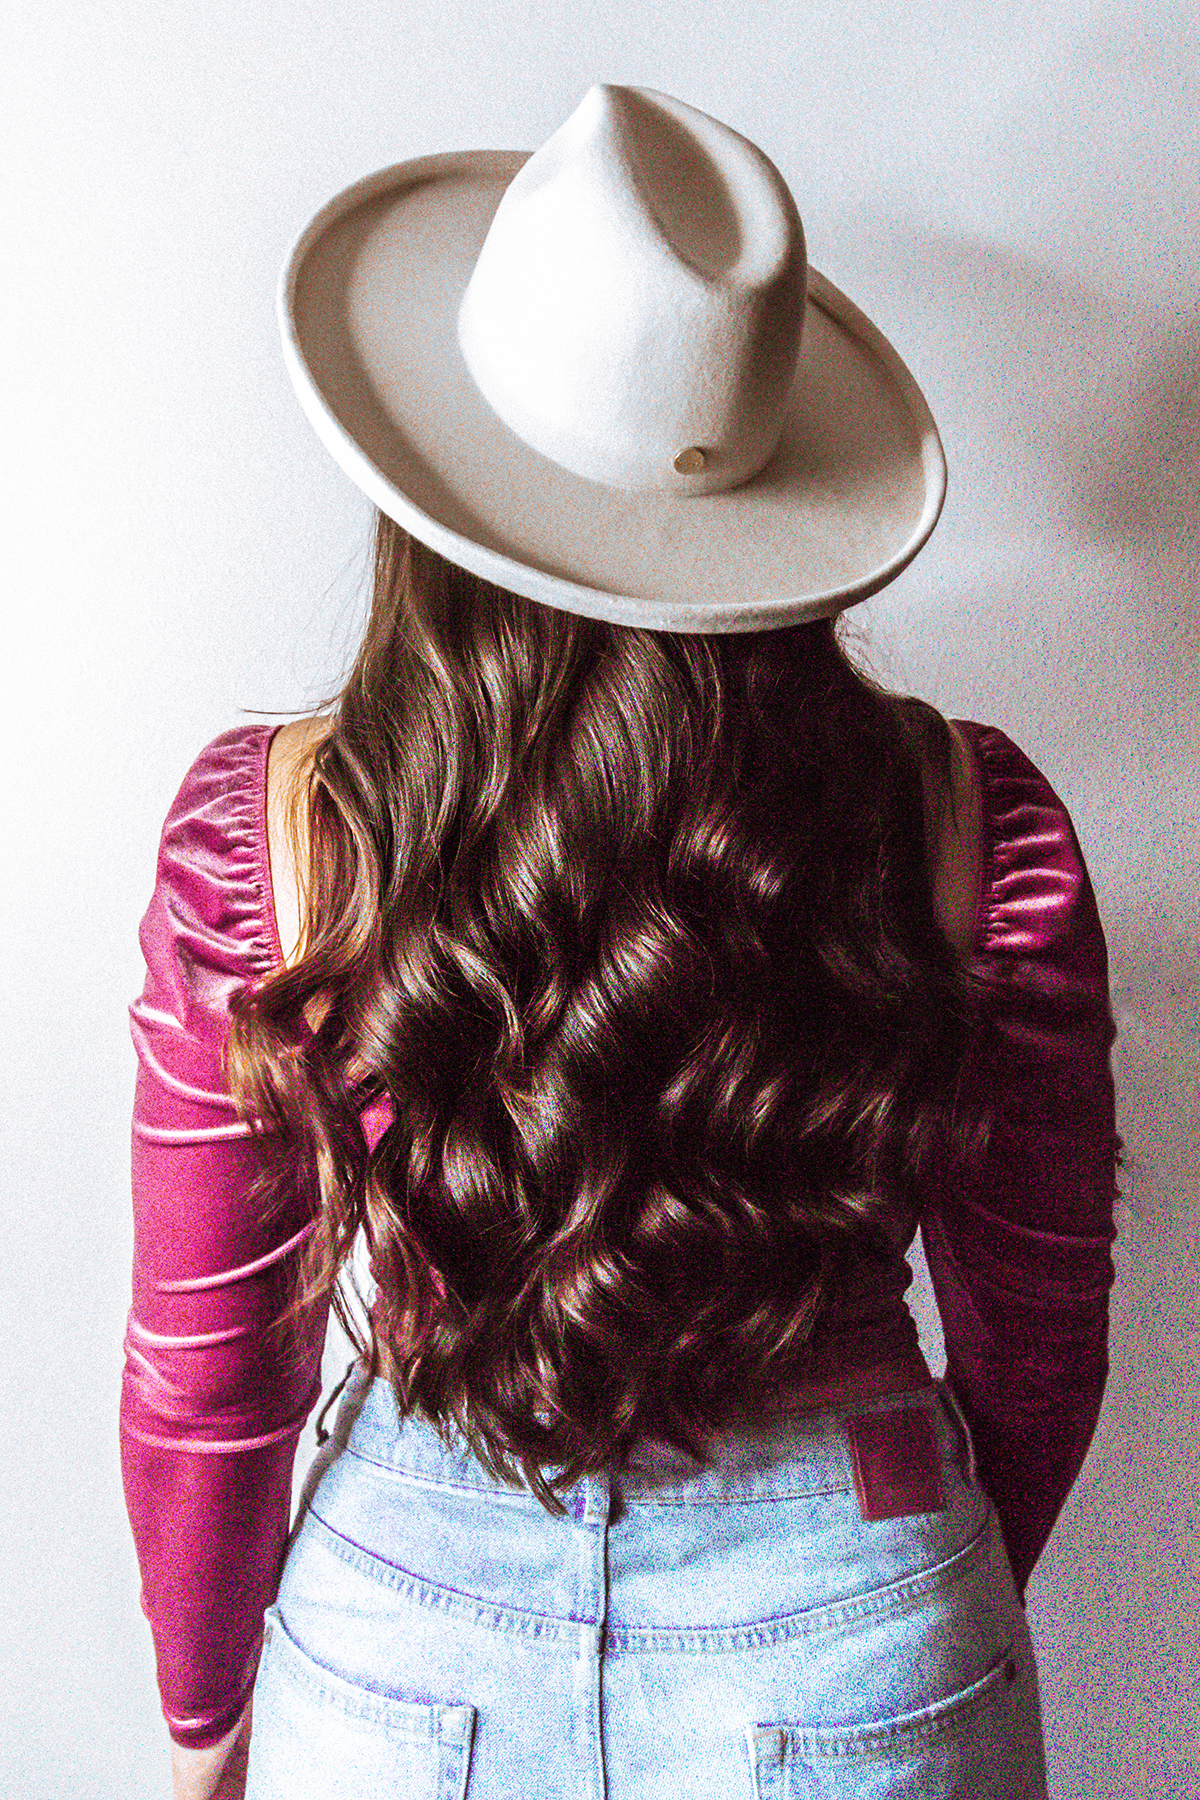 backside of a woman with long and thick brunette hair wearing a white wide brim felt hat, a velvet long sleeve top, and high waist jeans | shampoo tops